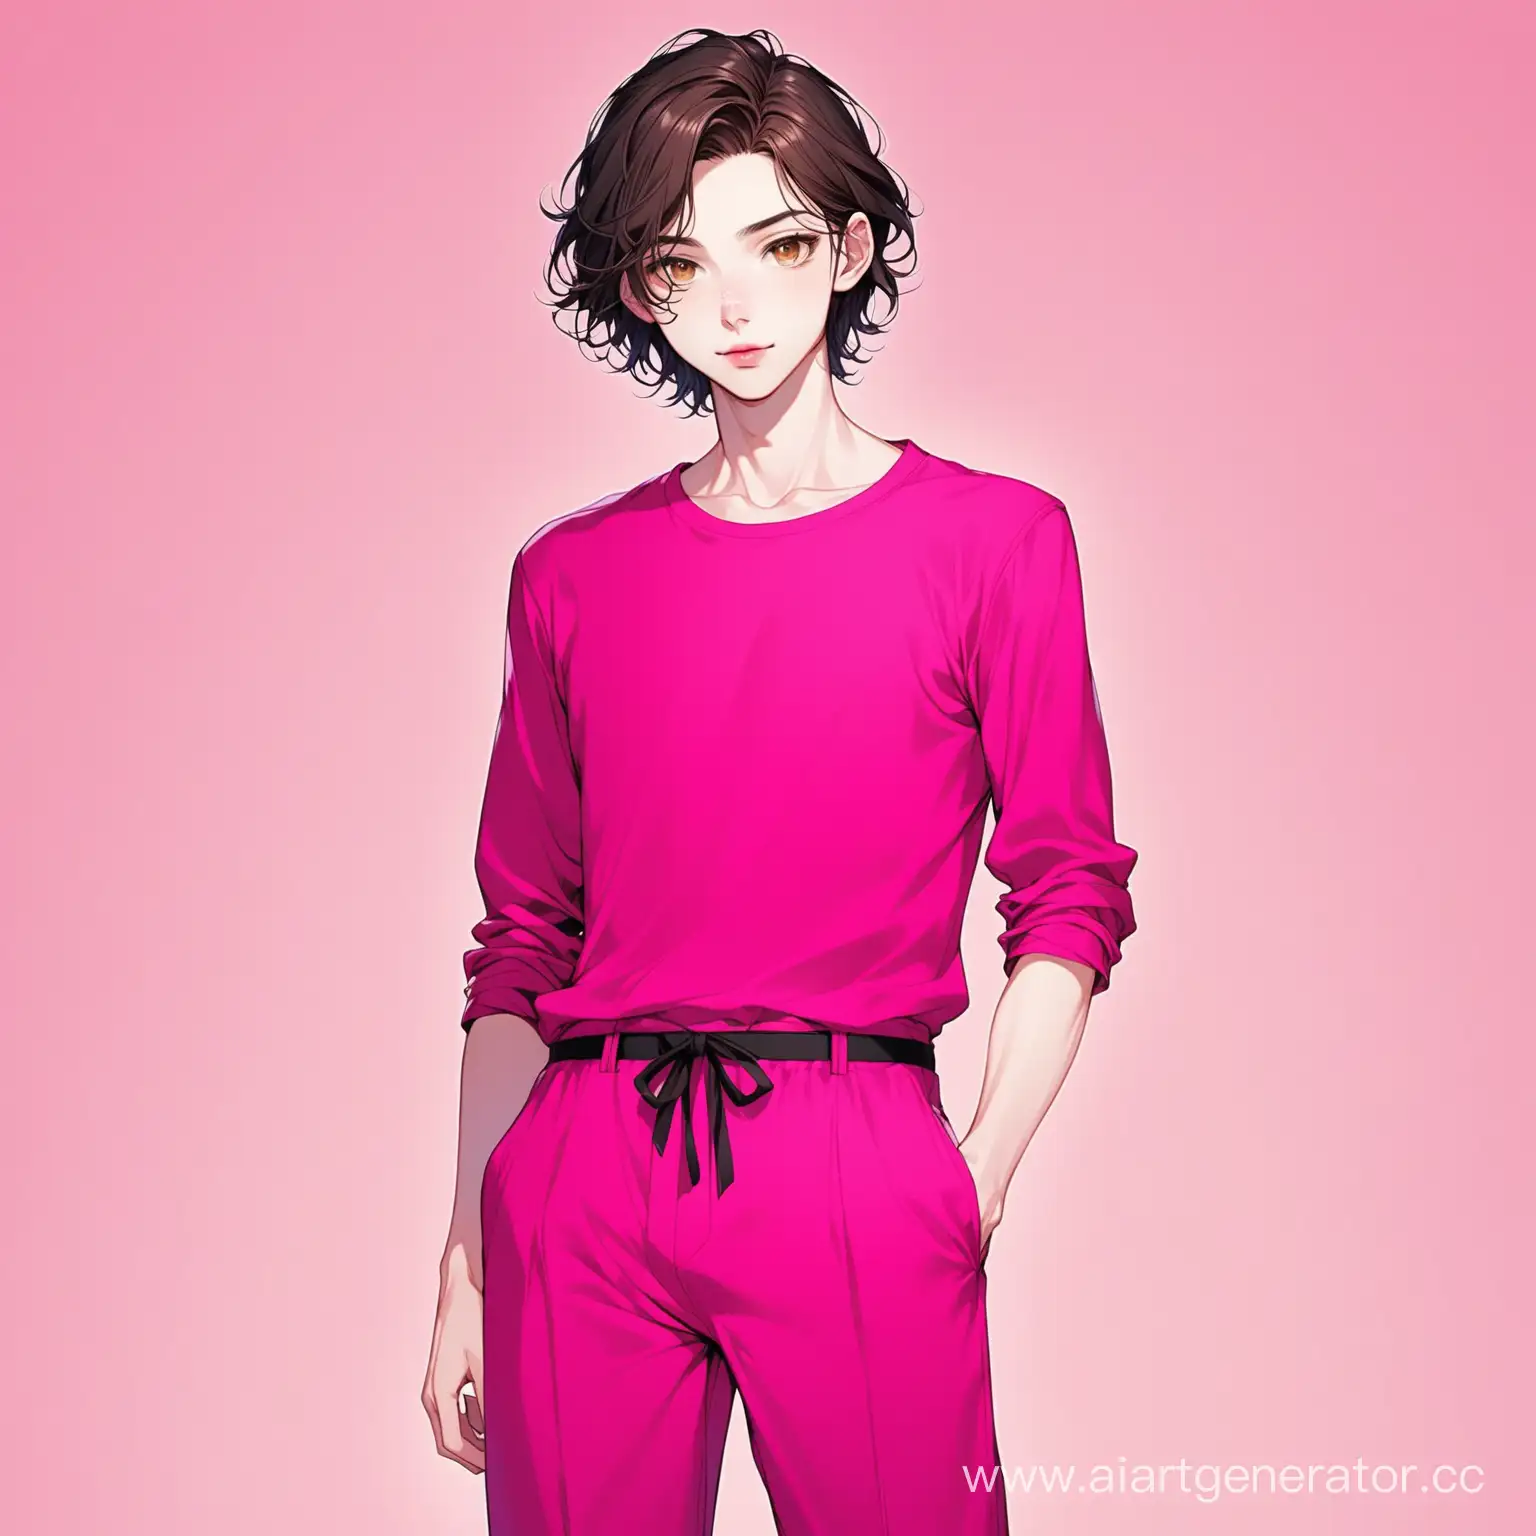 Portrait-of-a-Thin-Man-in-Bright-Pink-Clothing